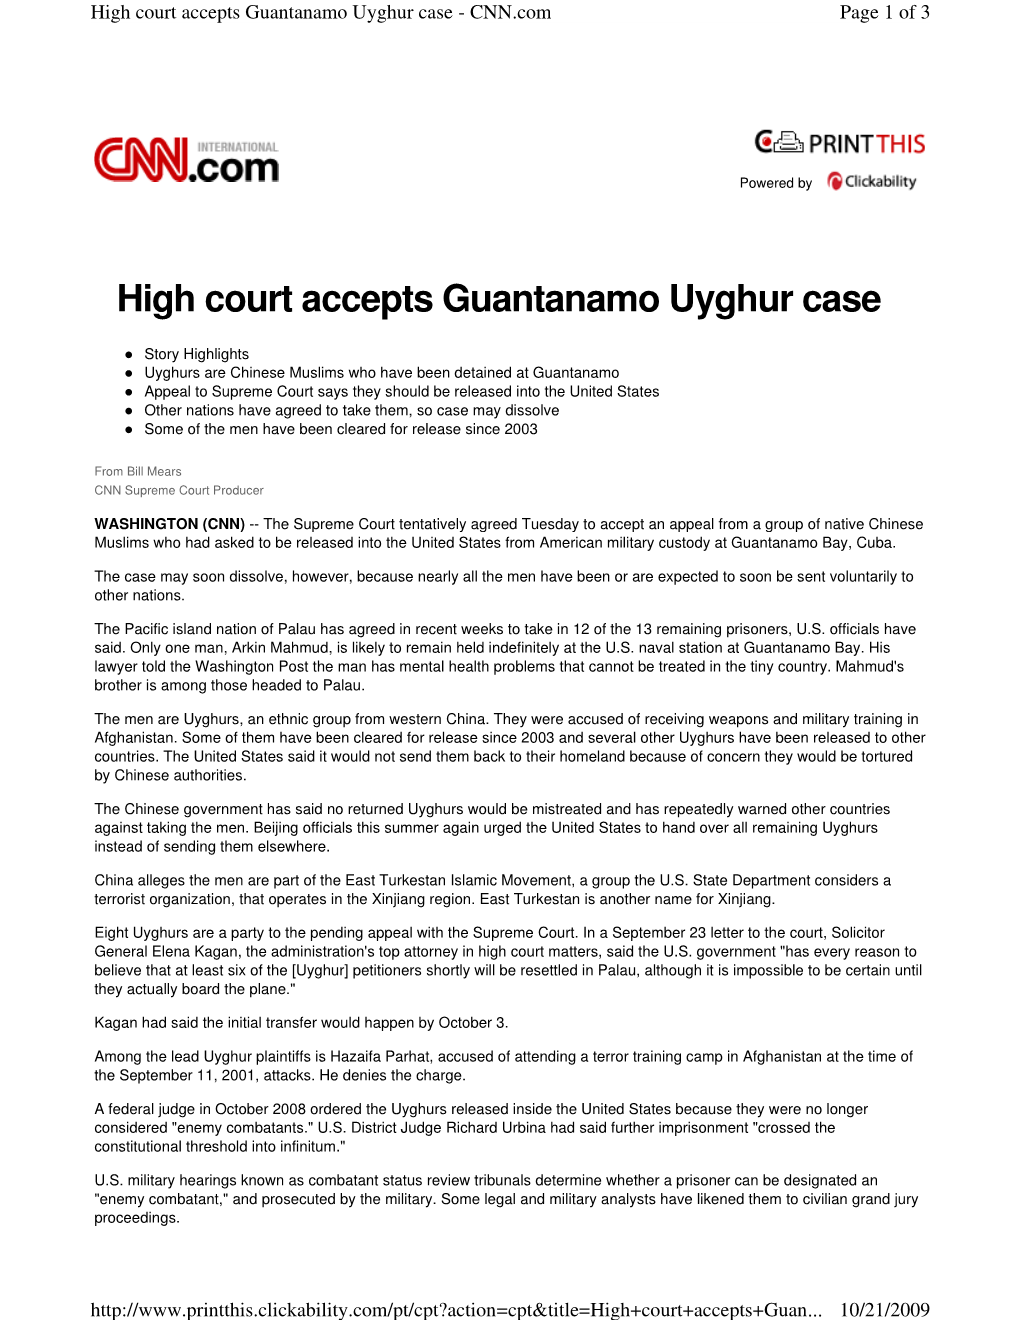 High Court Accepts Guantanamo Uyghur Case - CNN.Com Page 1 of 3